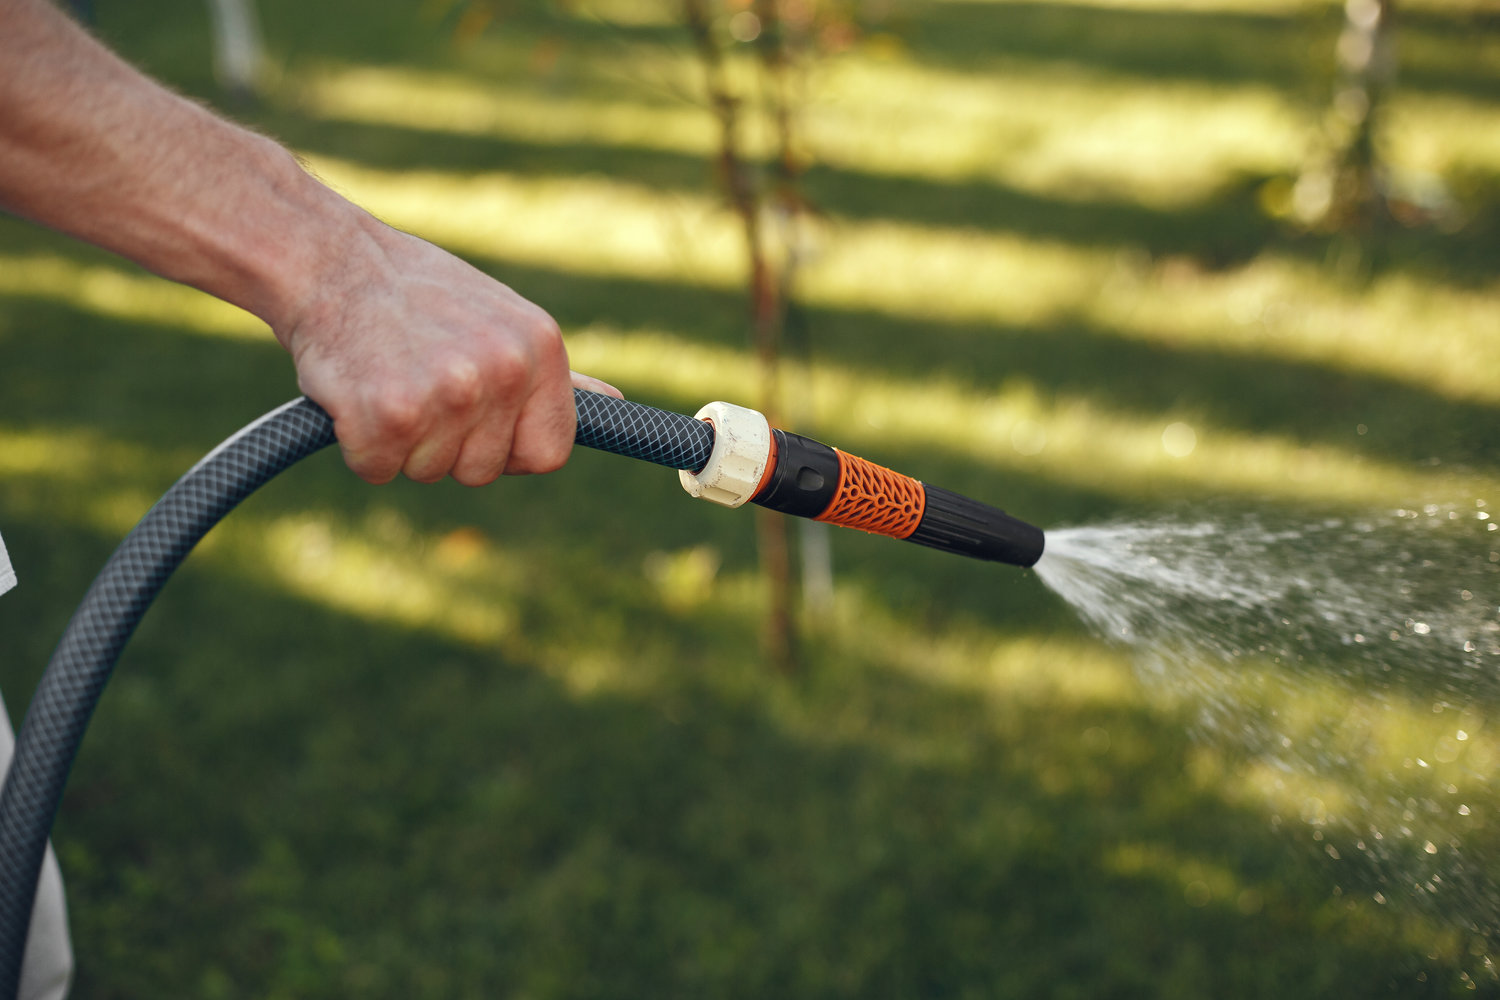 Water Restrictions in Metro Vancouver will be in effect from May 1